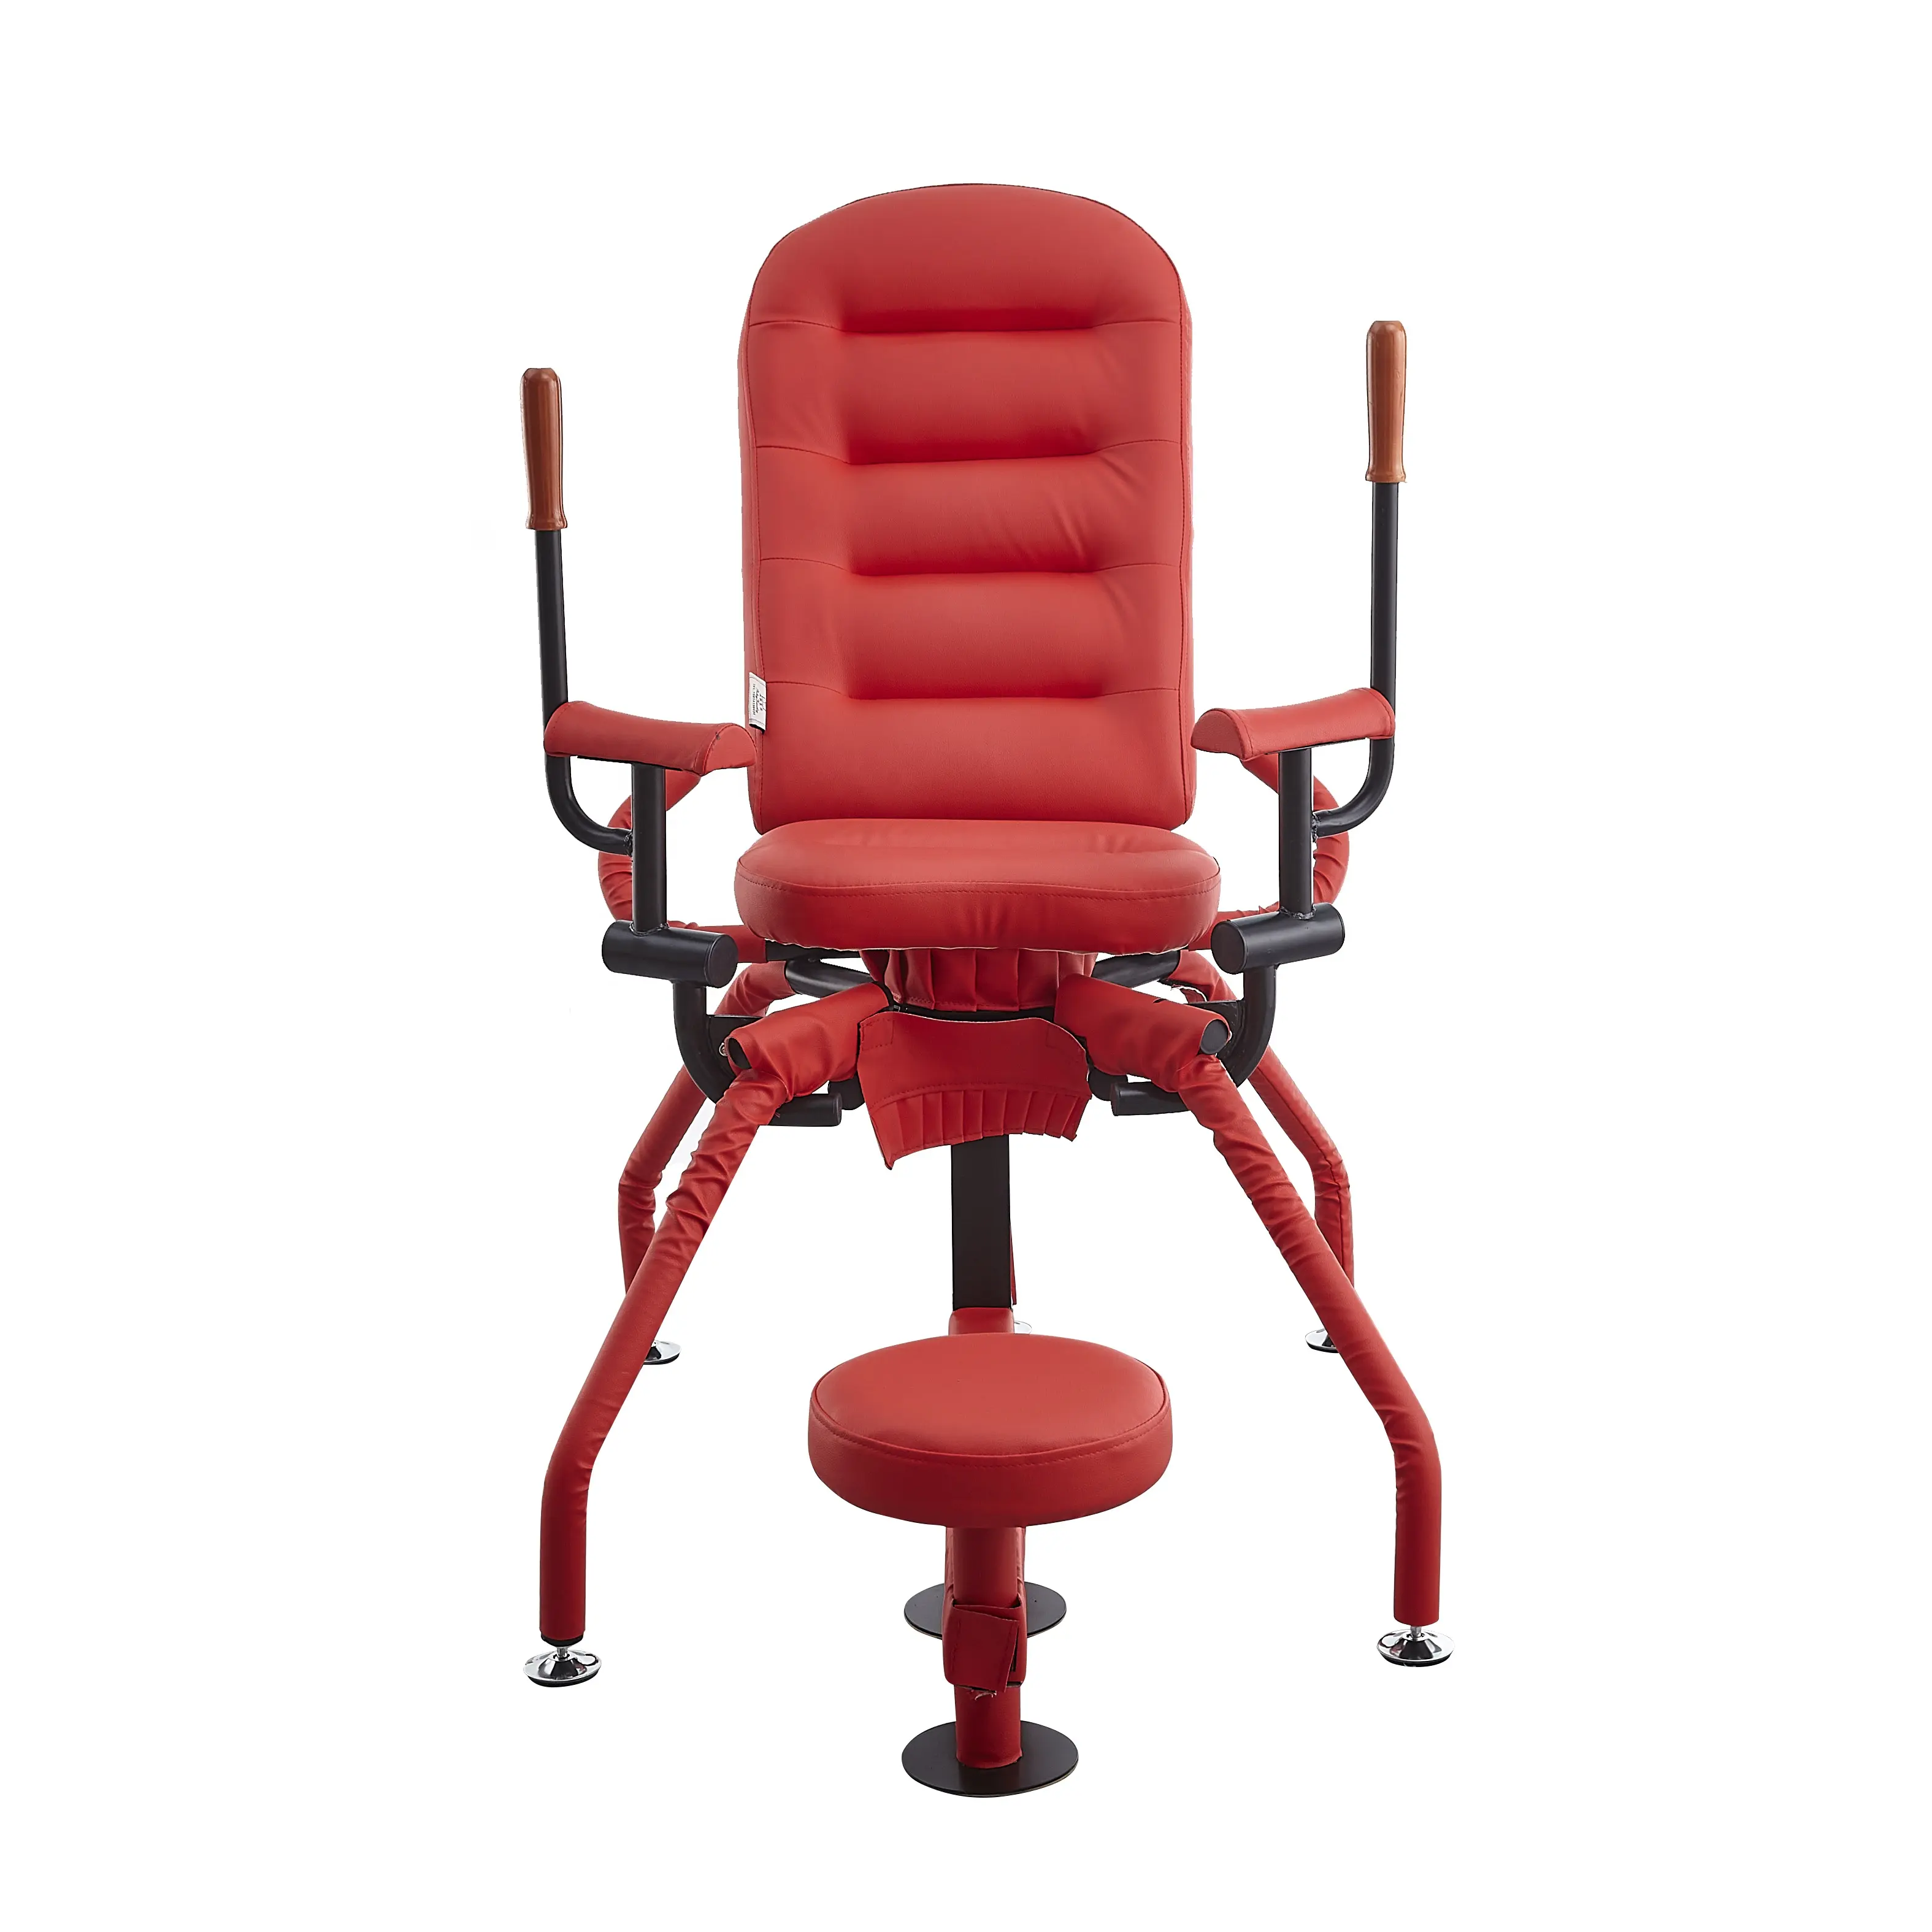 YPM Octopus Chair Couples Position Enhancer Sex Furniture Soft Loving Bouncer Sexual Assistance Sex Chair